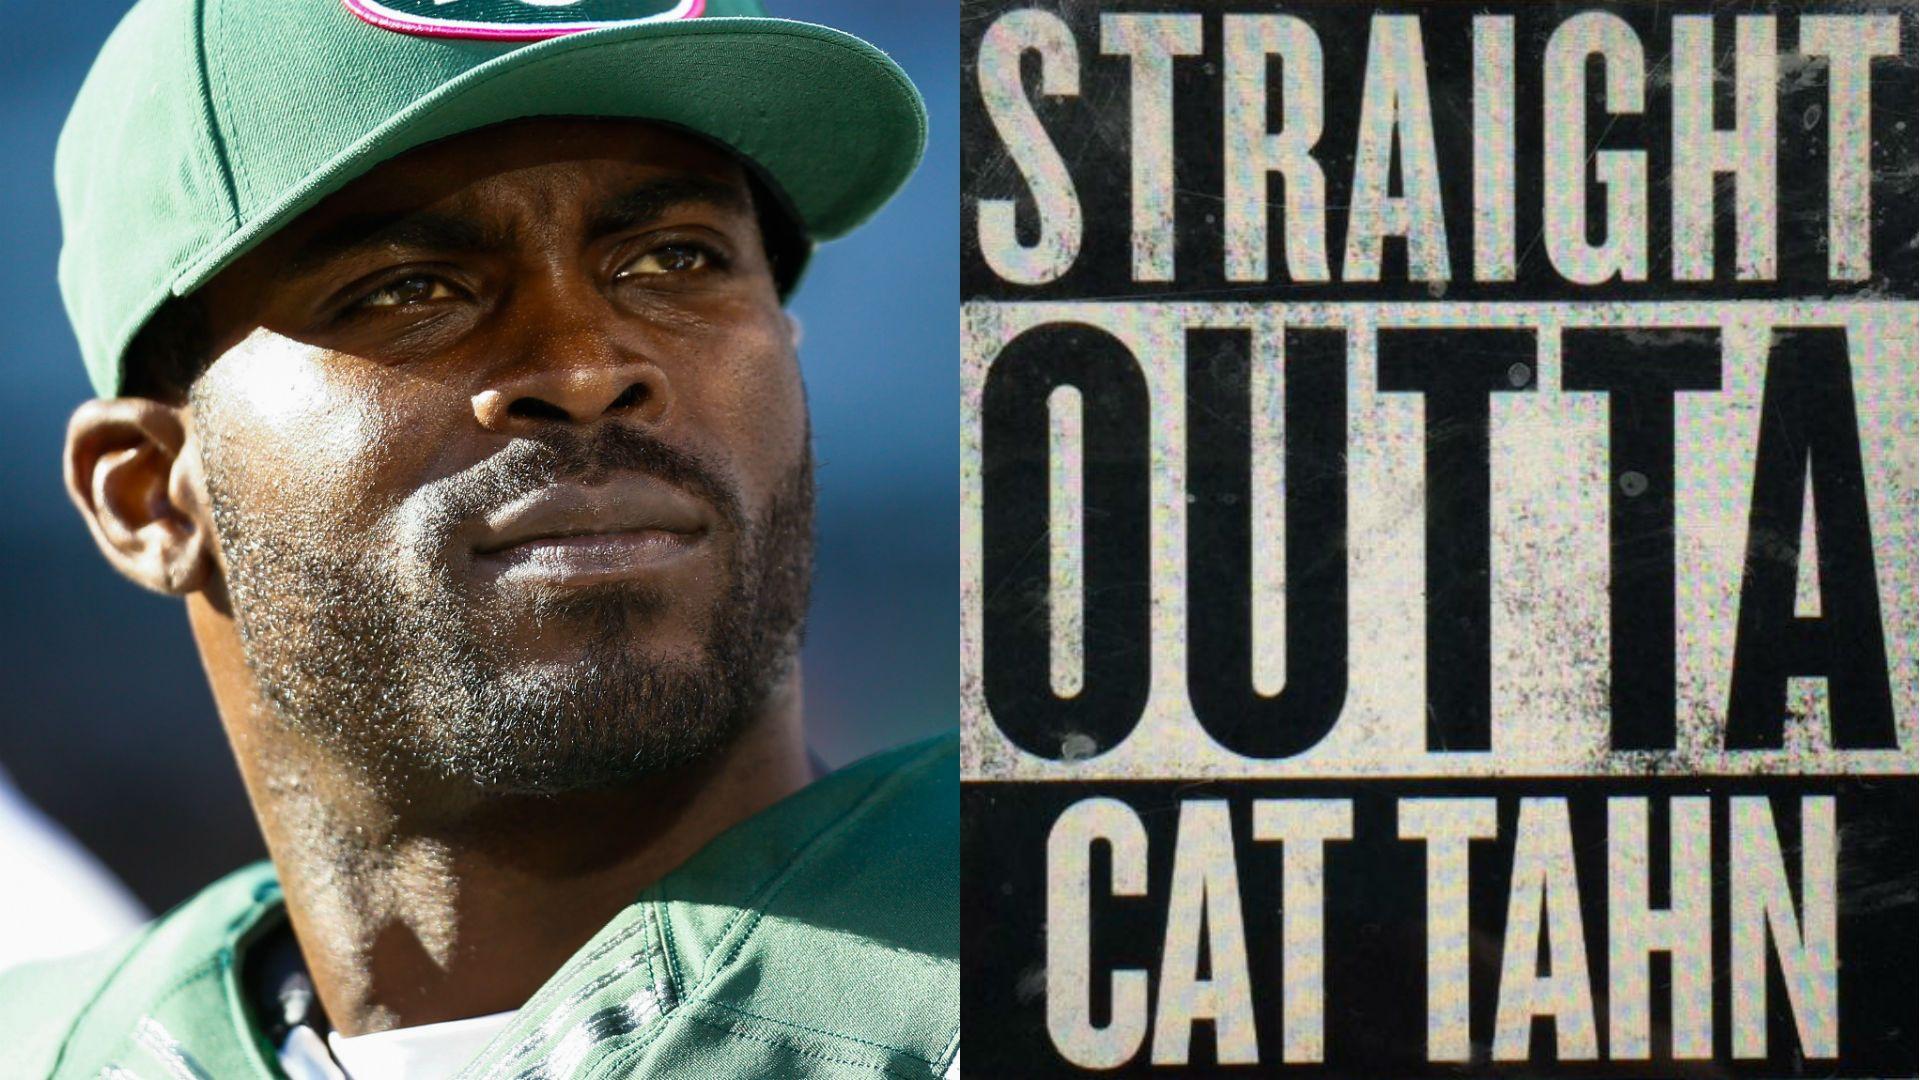 Michael Vick, the Steelers and a trip to 'Cat Town' on Pittsburgh